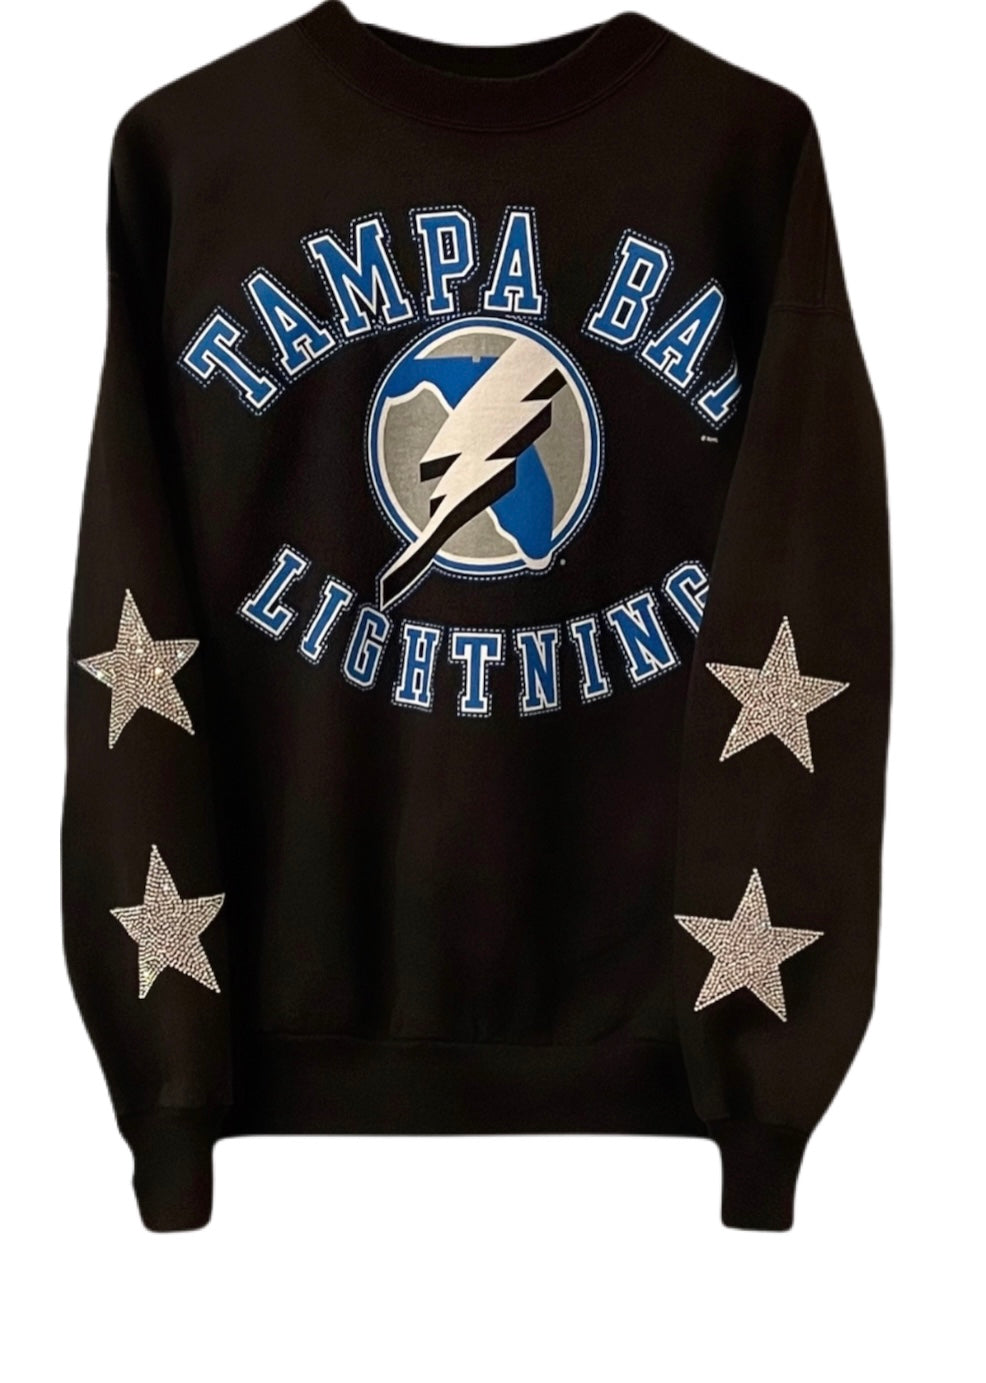 Tampa Bay Lightning, NHL One of a KIND vintage Sweatshirt with Crystal Star Design with Custom Crystal Name & Number